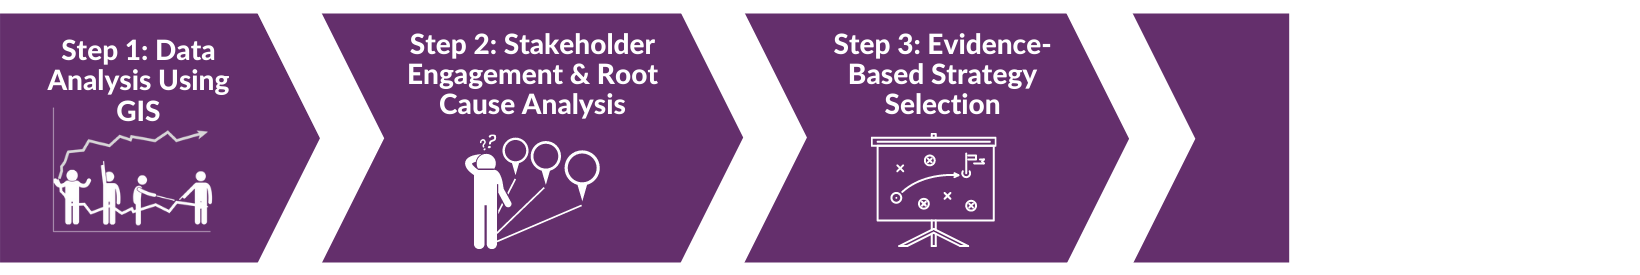 Project Process. Step 1: Data Analysis Using GIS. Step 2: Stakeholder Engagement and Root Cause Analysis. Step 3: Evidence-Based Strategy Selection